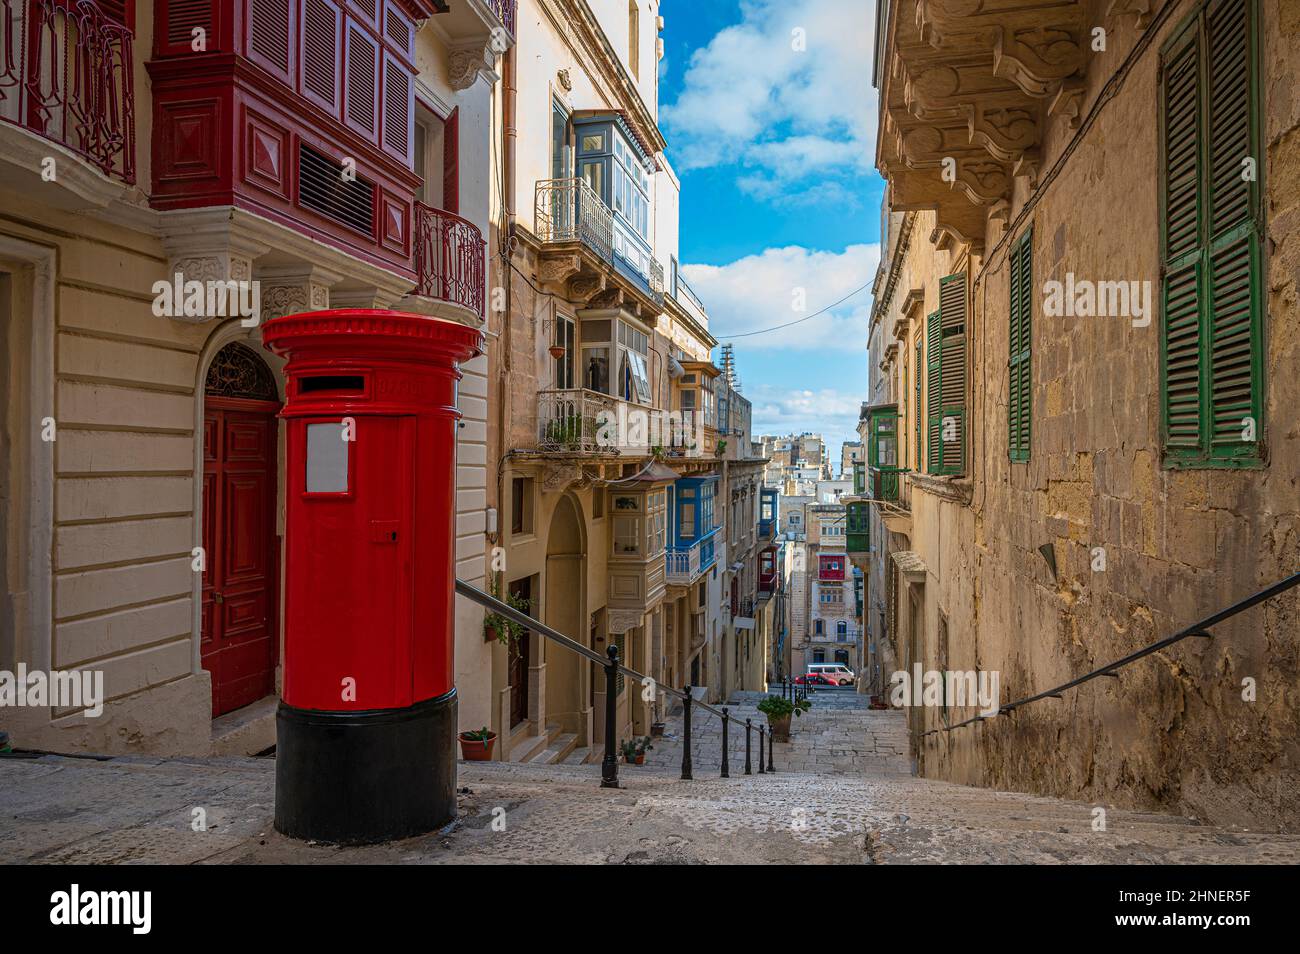 Red vintage old fashioned mail box on narrow street with stairs in Valletta, Malta. Stock Photo